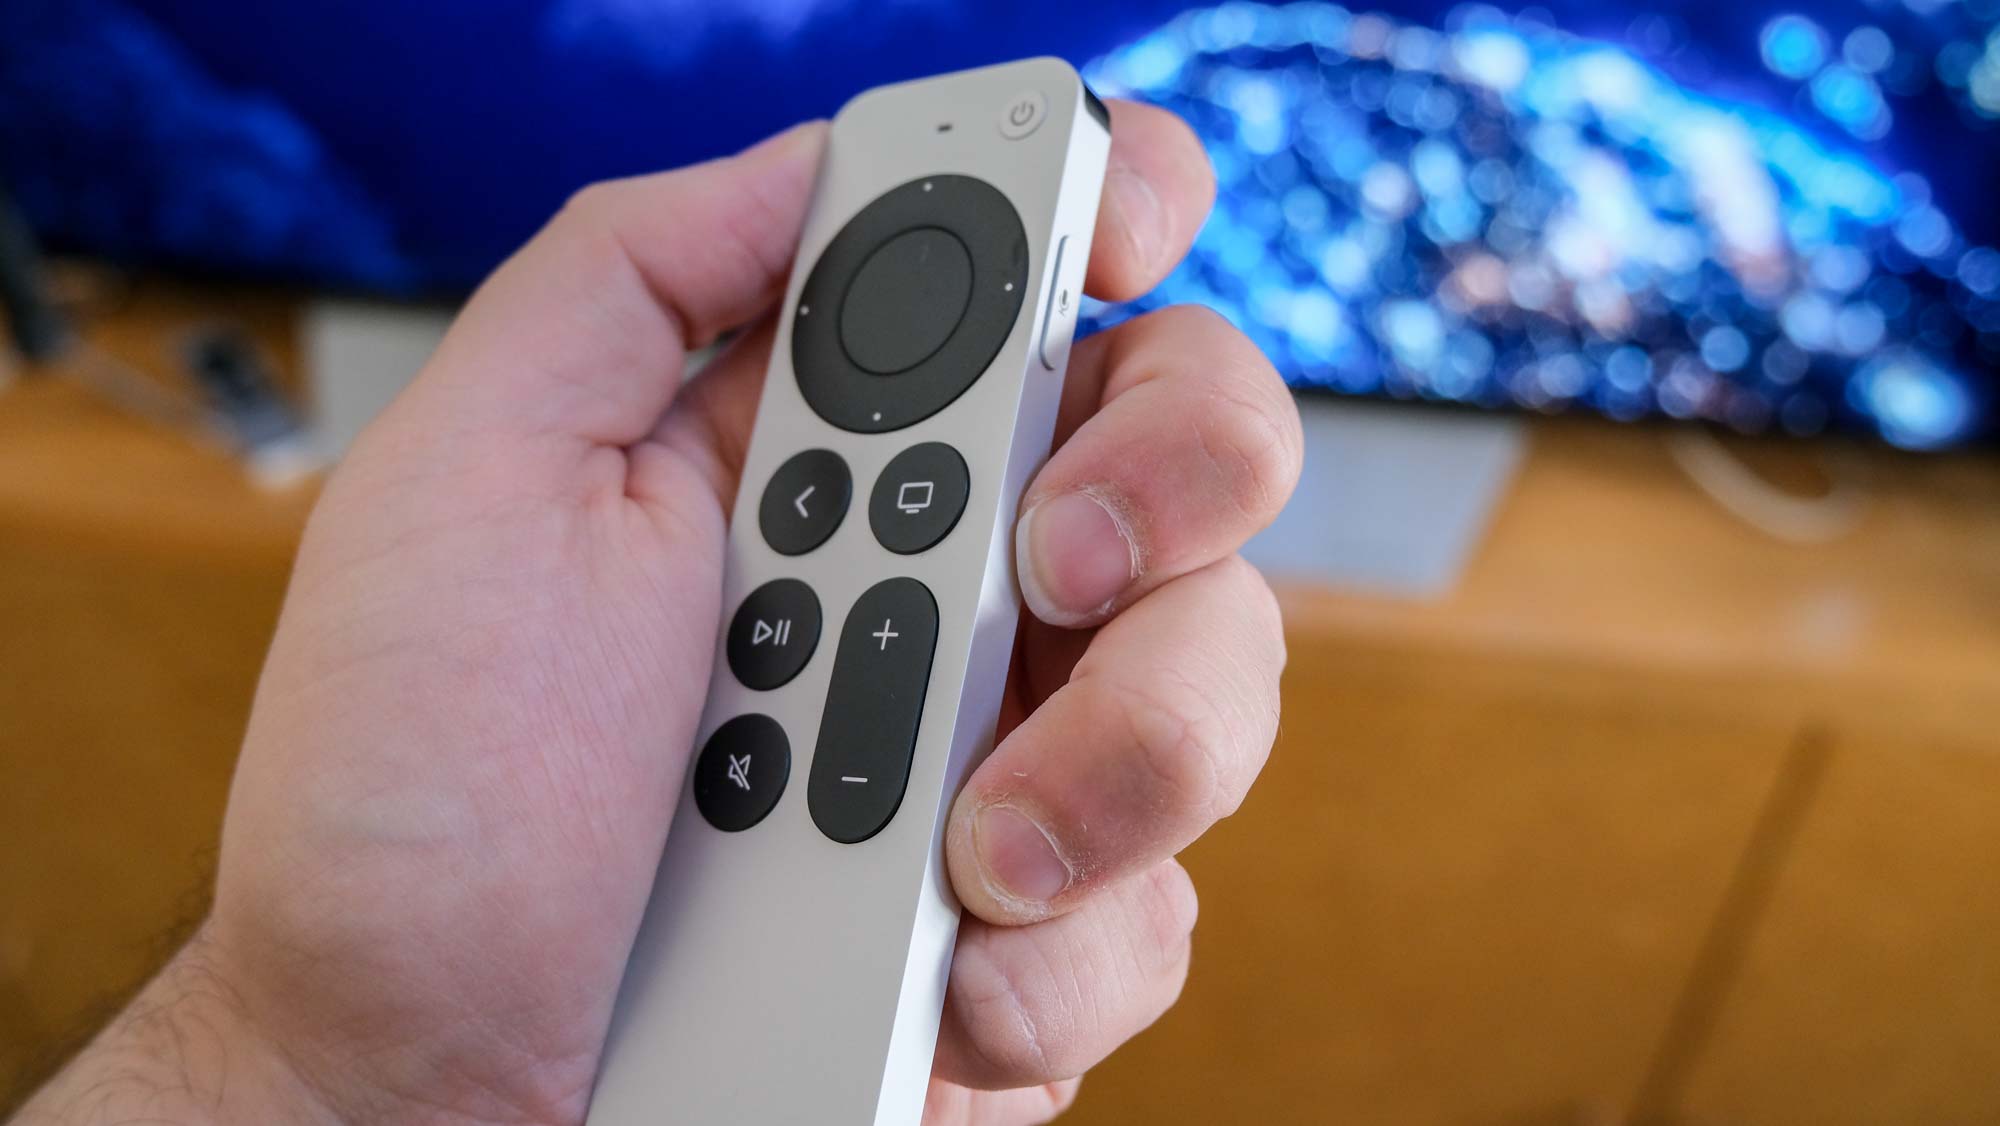 The Apple TV 4K (2022) remote in hand, tilted to the side